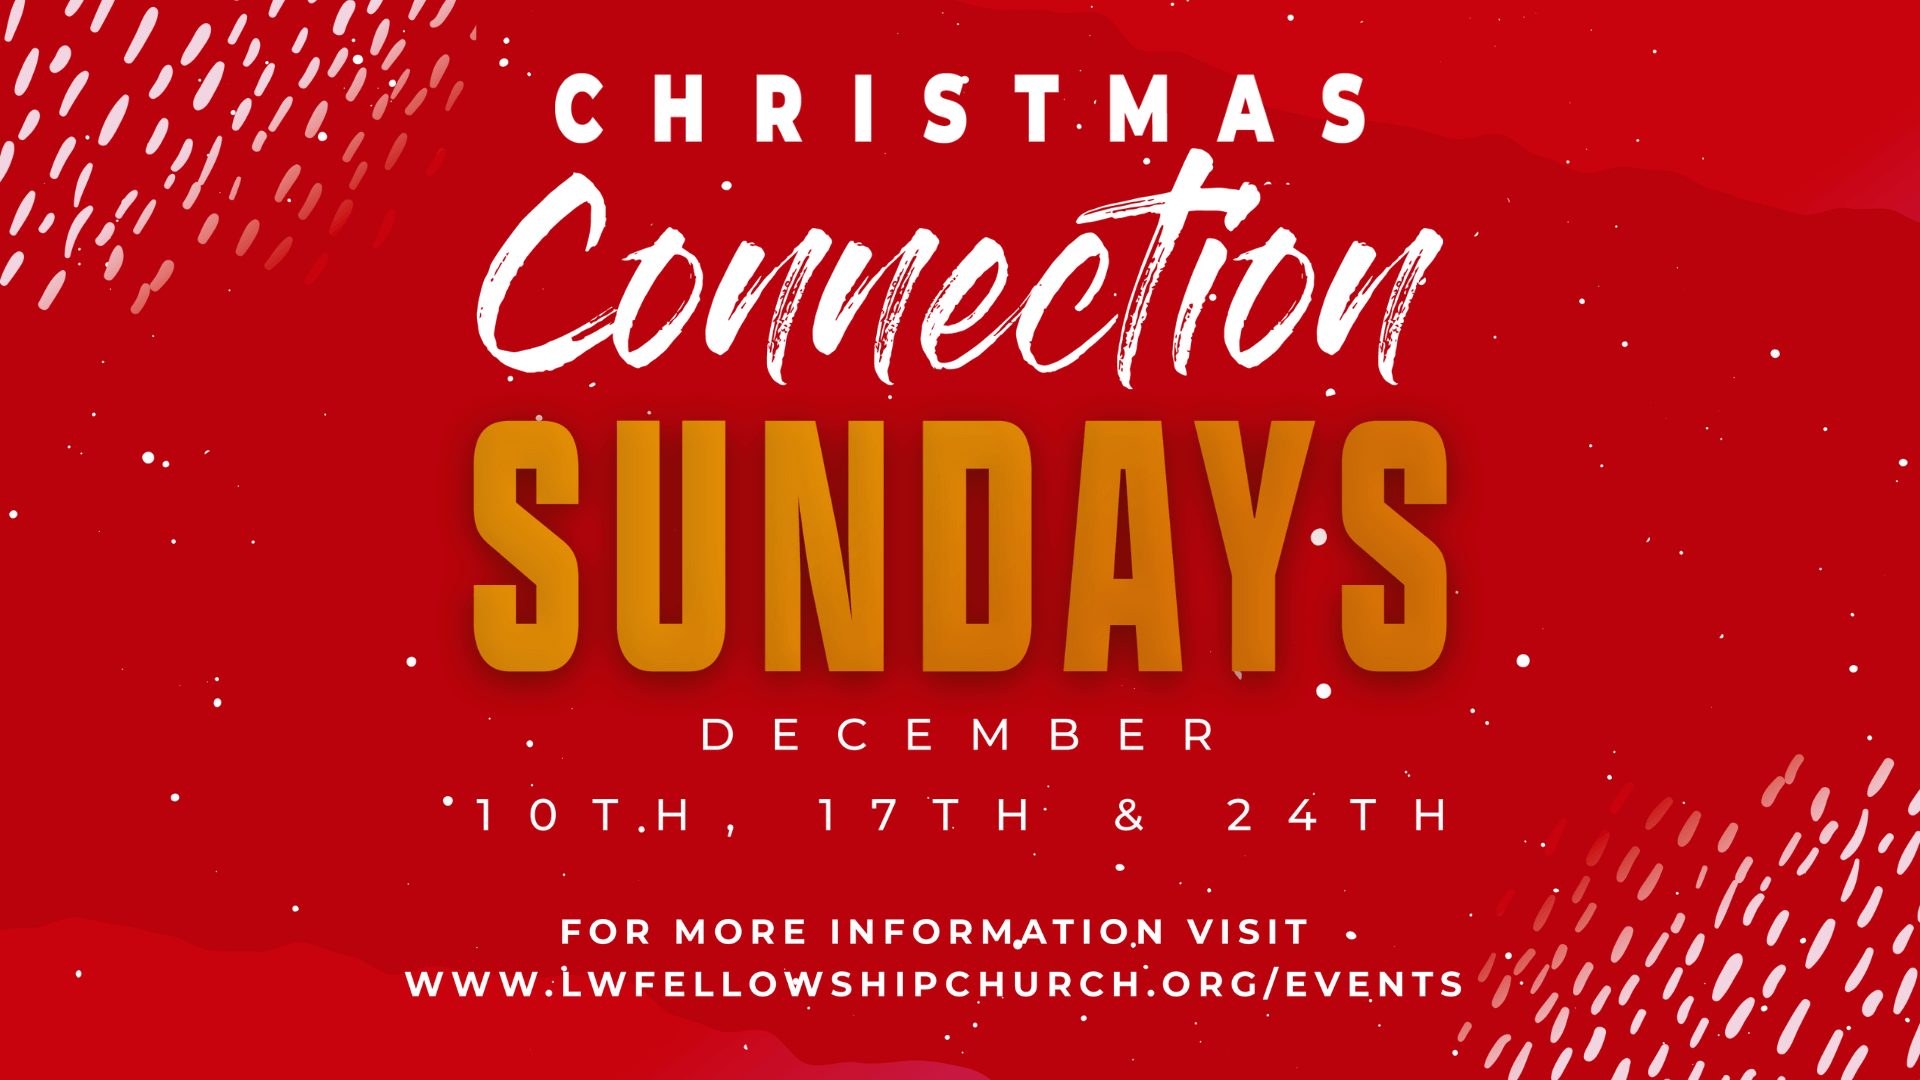 christmas connection sundays, dec 10 17 and 24